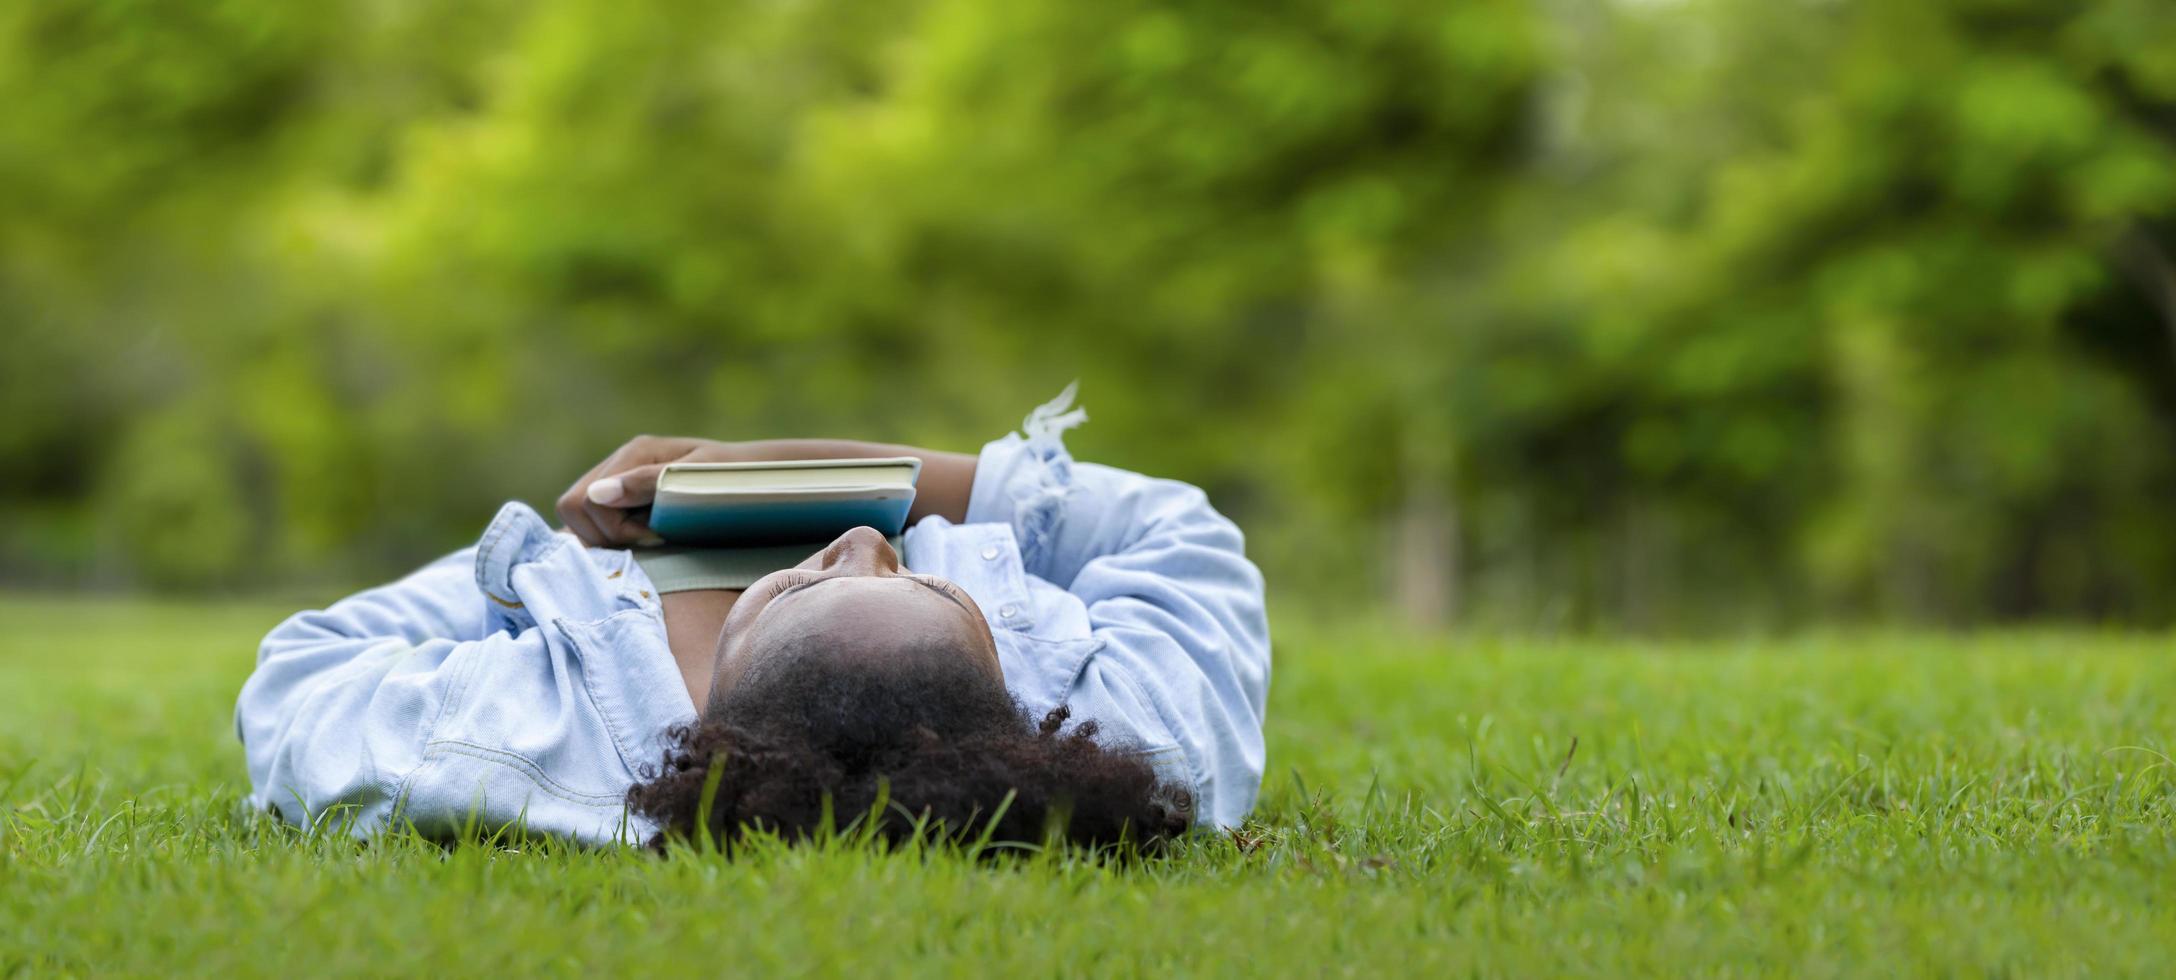 African American woman is lying down in the grass lawn inside the public park holding book in her hand during summer for reading and education concept with copy space photo